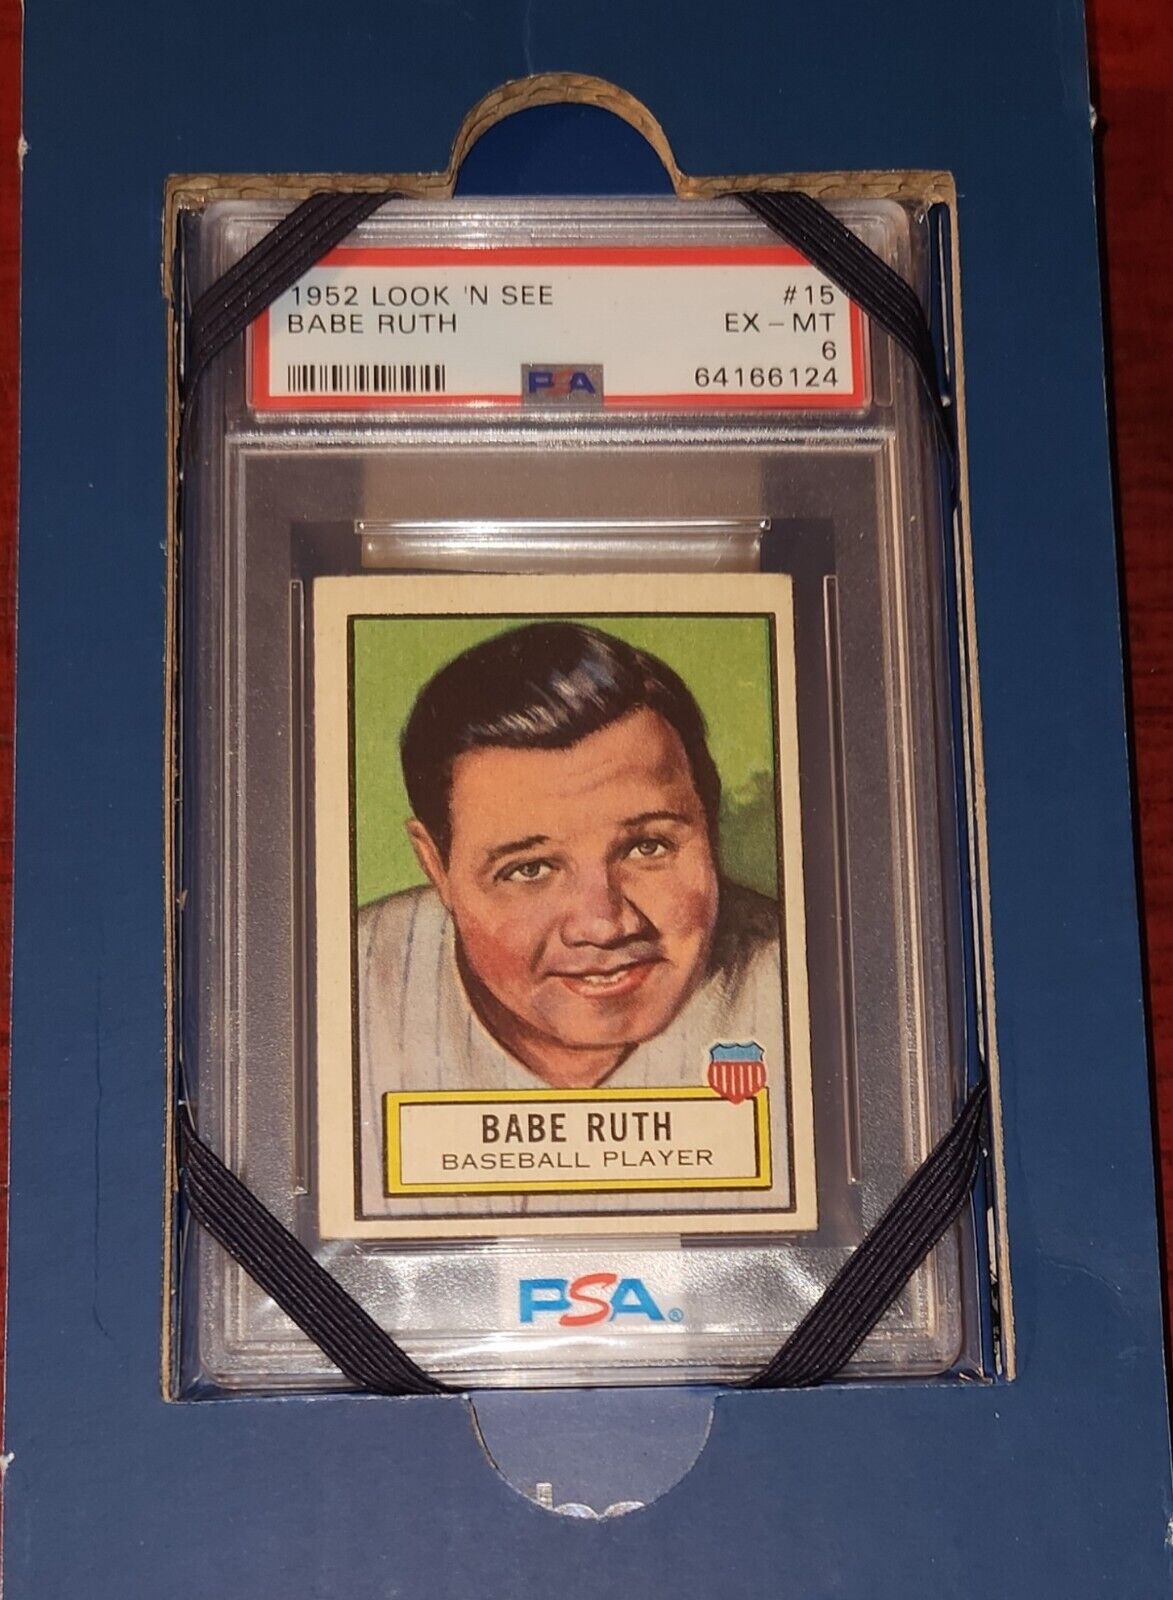 (128 PSA LOT) BABE RUTH/QUEEN ELIZABETH/REMBRANDT/FDR 1952 TOPPS LOOK N SEE SET